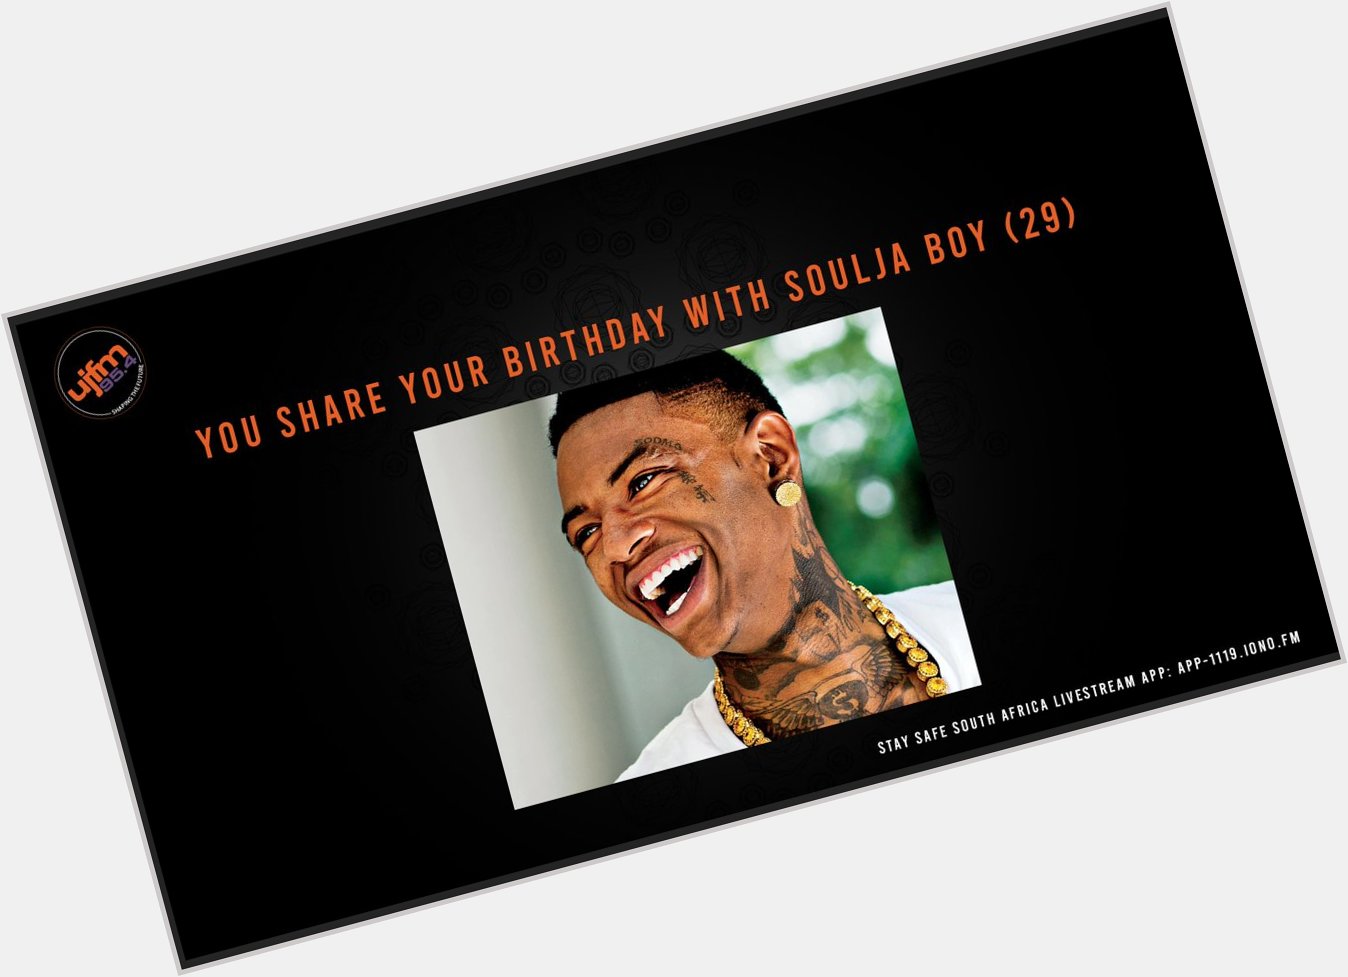 Happy birthday to every one that has a birthday today you share your

Birthday with Soulja Boy (29) 